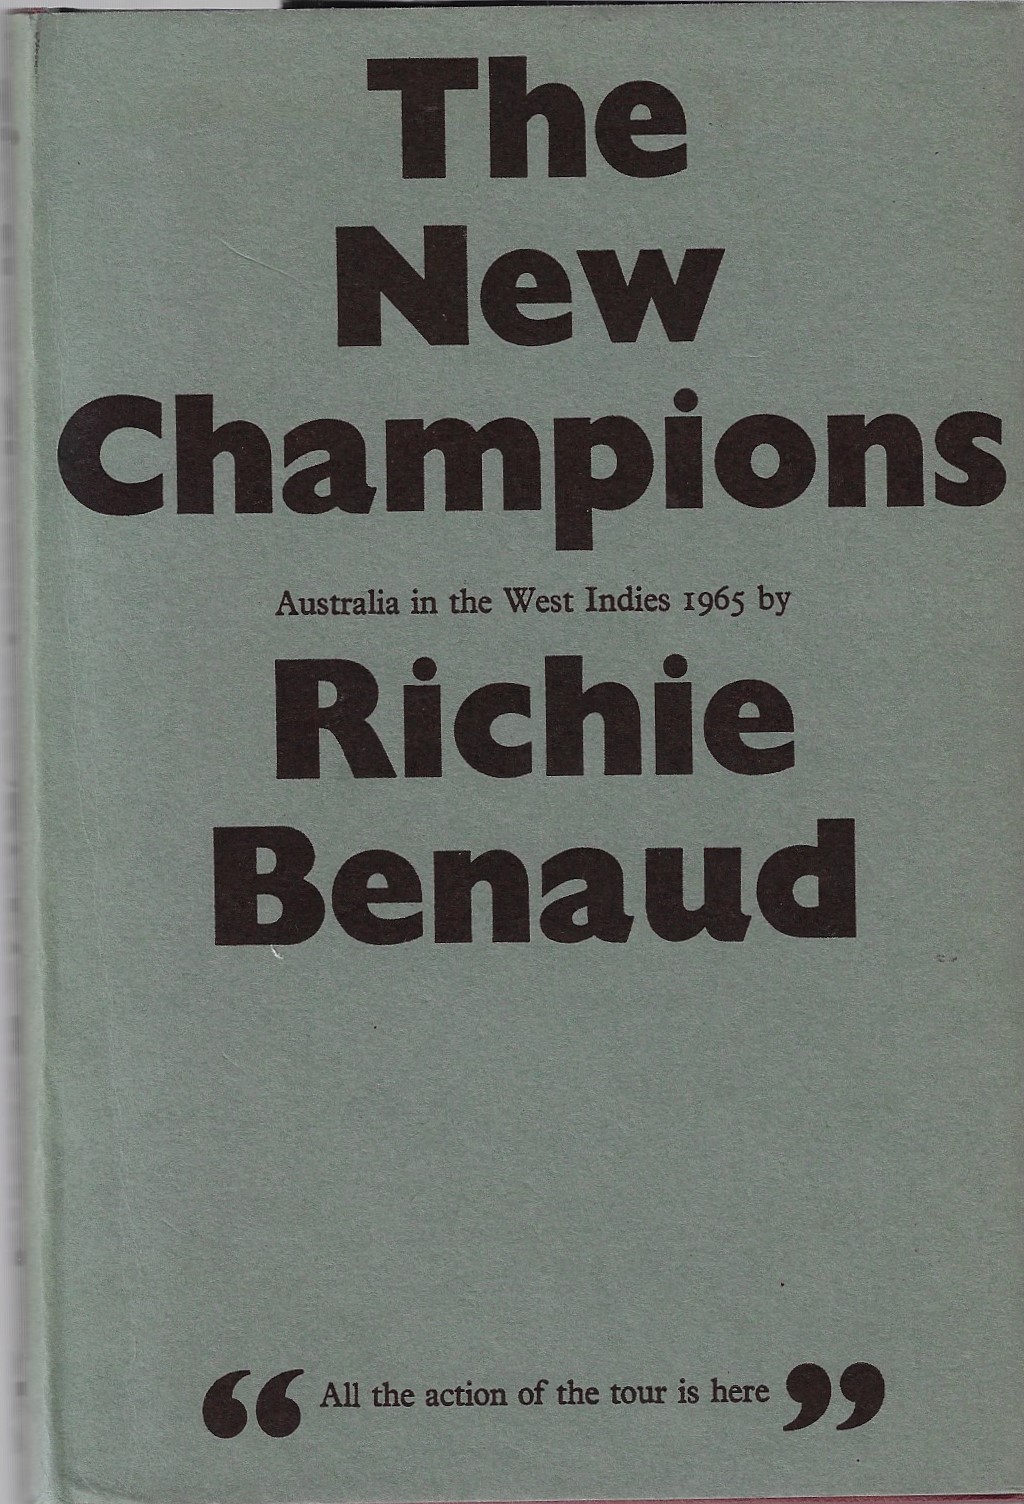 Benaud, Richie - The new champions -Australia in the West Indies 1965